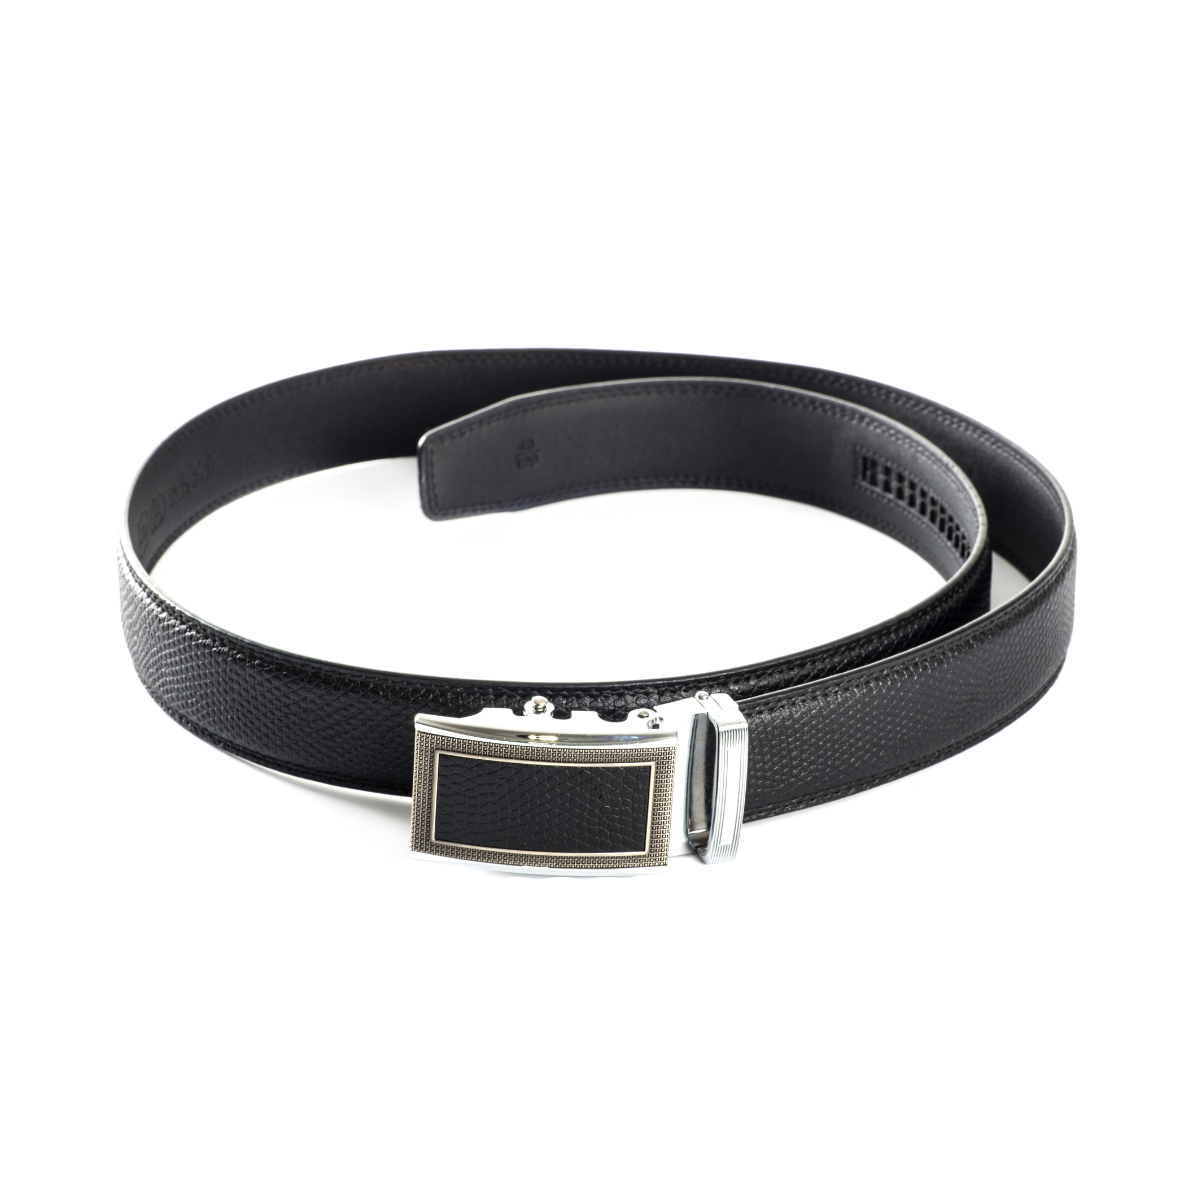 9. A Timeless Touch: Classic Leather Belt, the Perfect 2nd Year Anniversary Gift for Him